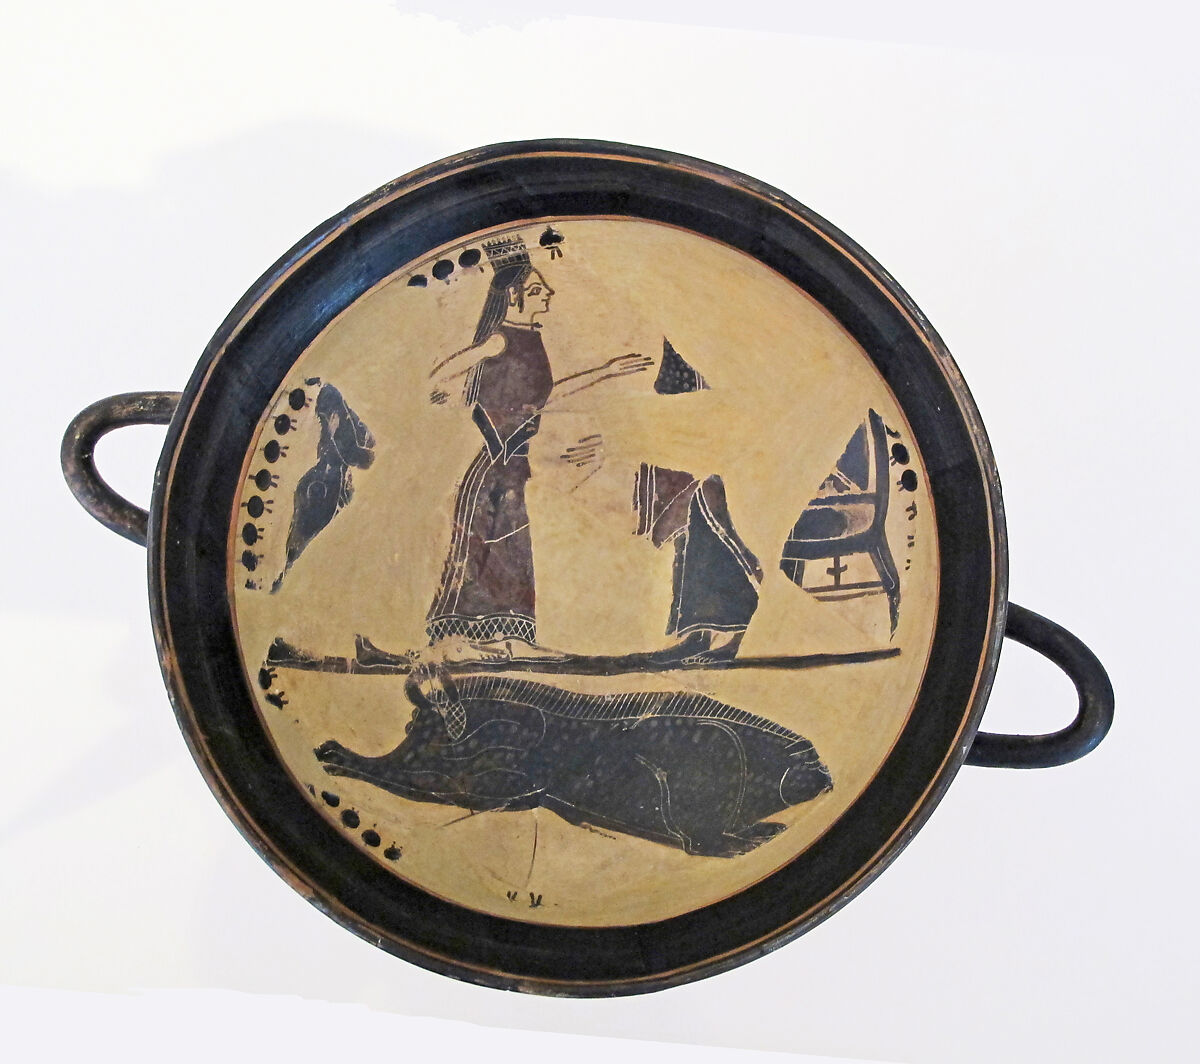 Terracotta kylix (drinking cup), Attributed to the Boreads Painter, Terracotta, Greek, Laconian 